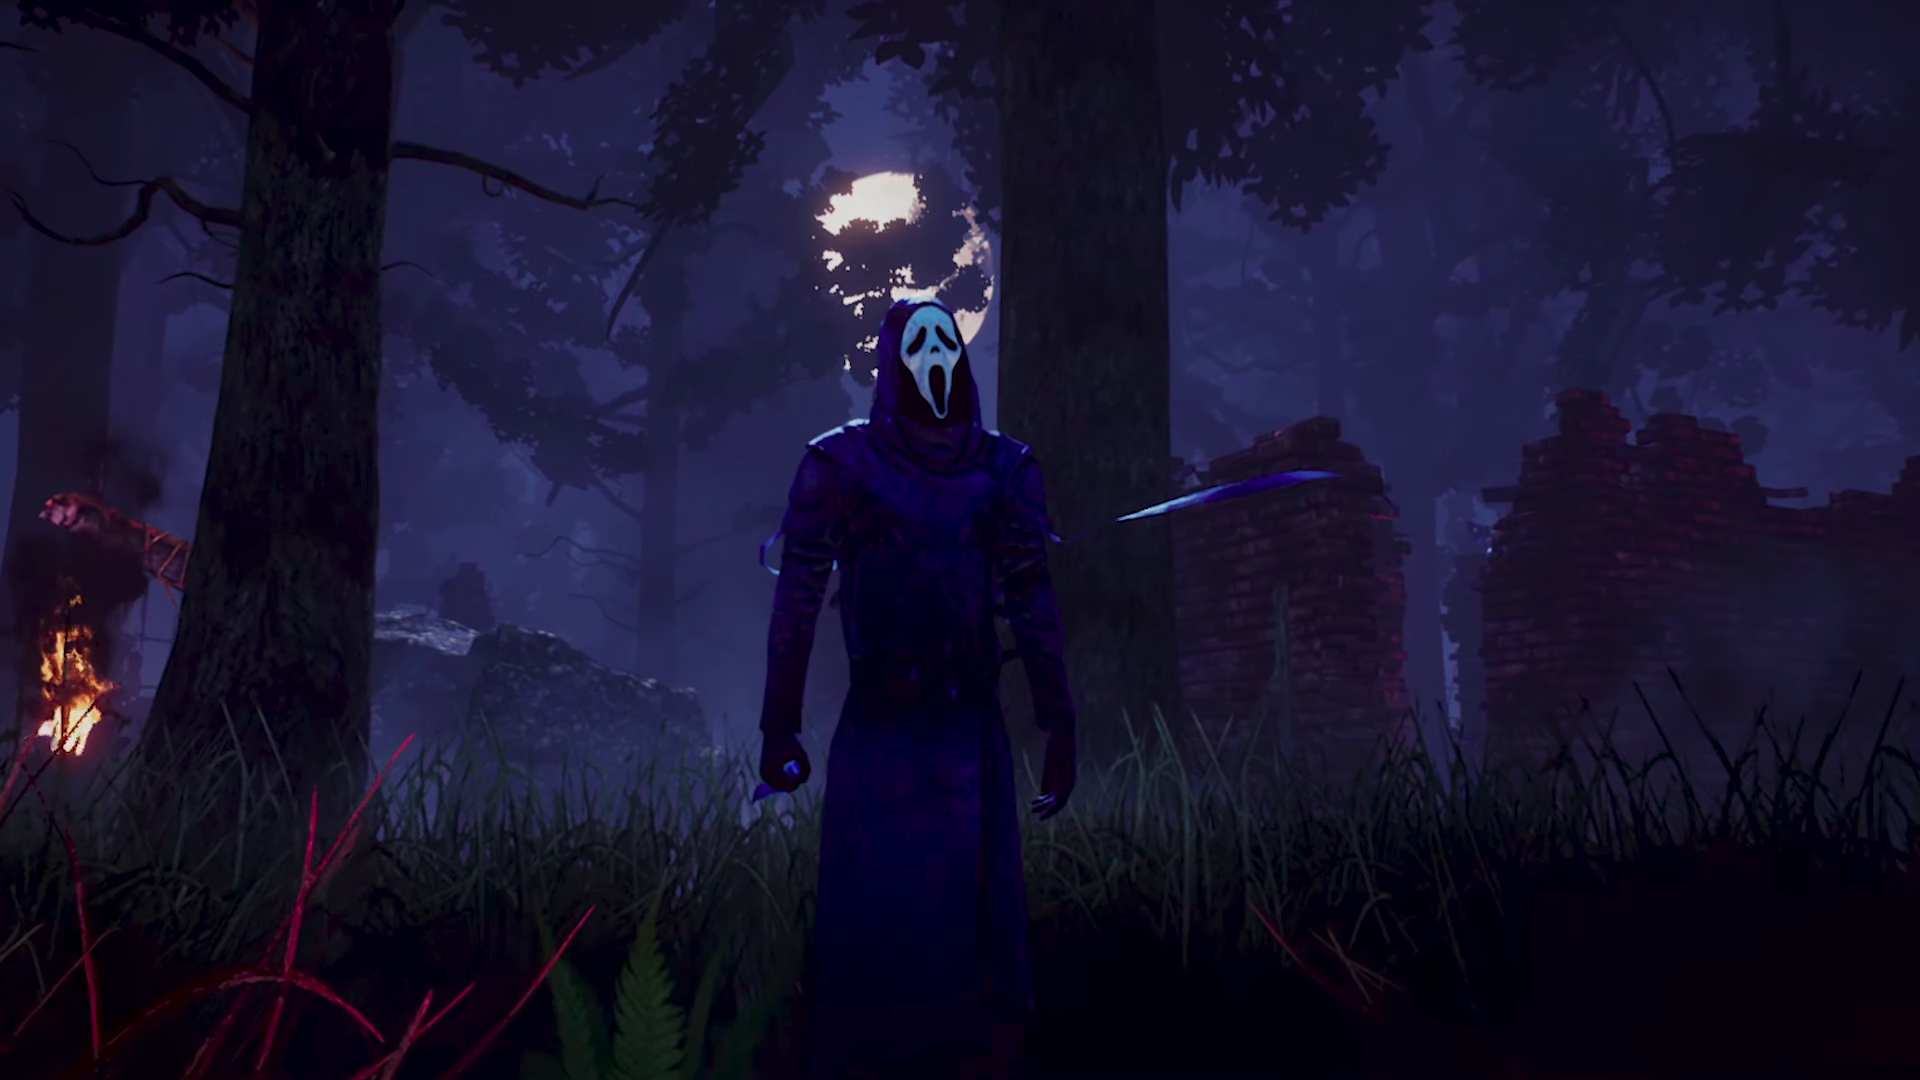 The unknown dead by daylight. Красный лес Dead by Daylight.